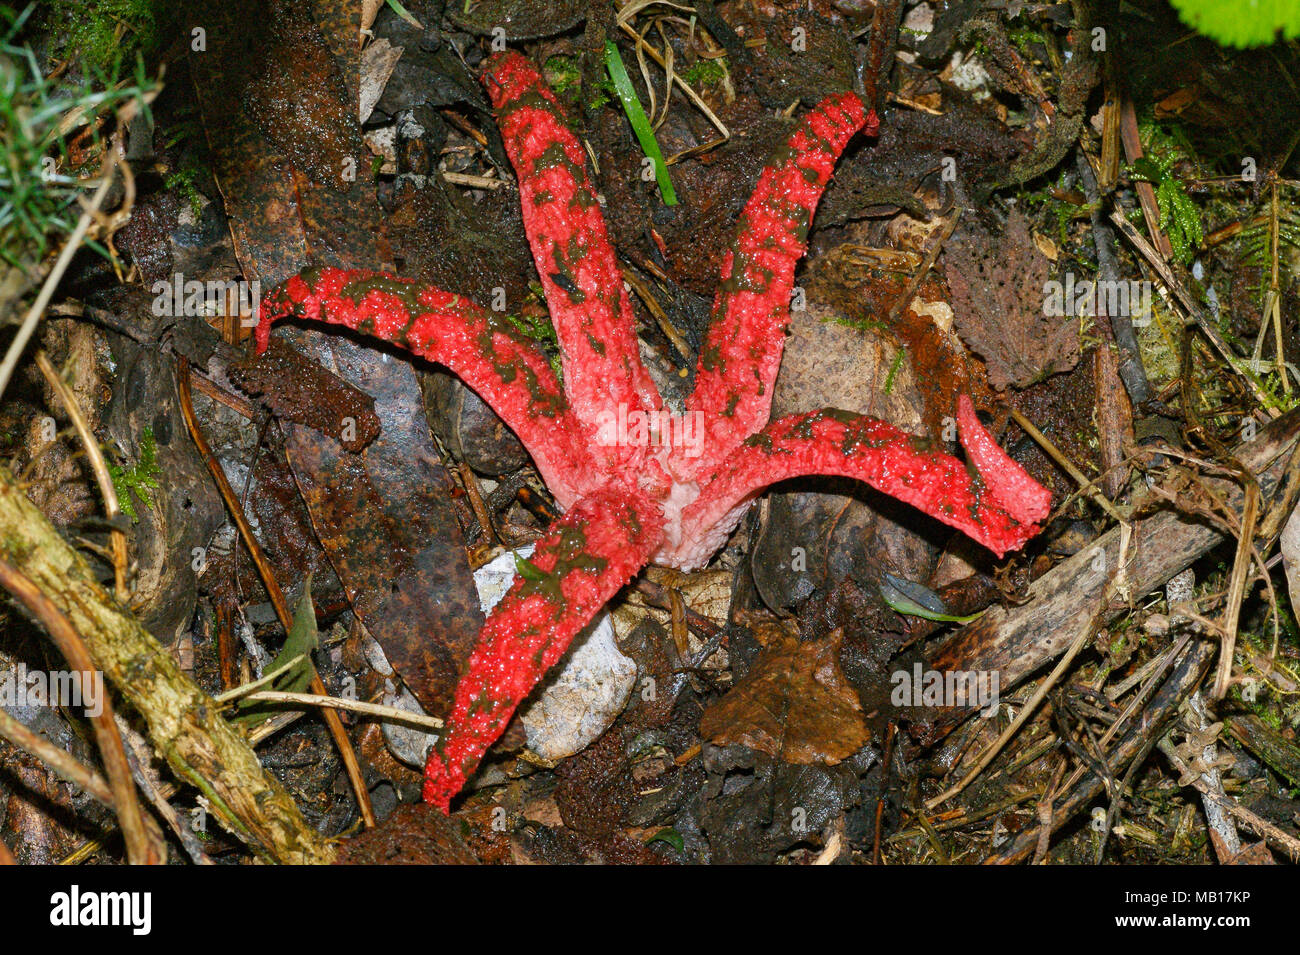 Clathrus archeri, known as octopus stinkhorn, or devil's fingers, is a fungus from Australia that smells like putrid flesh. Picture taken in Spain. Stock Photo